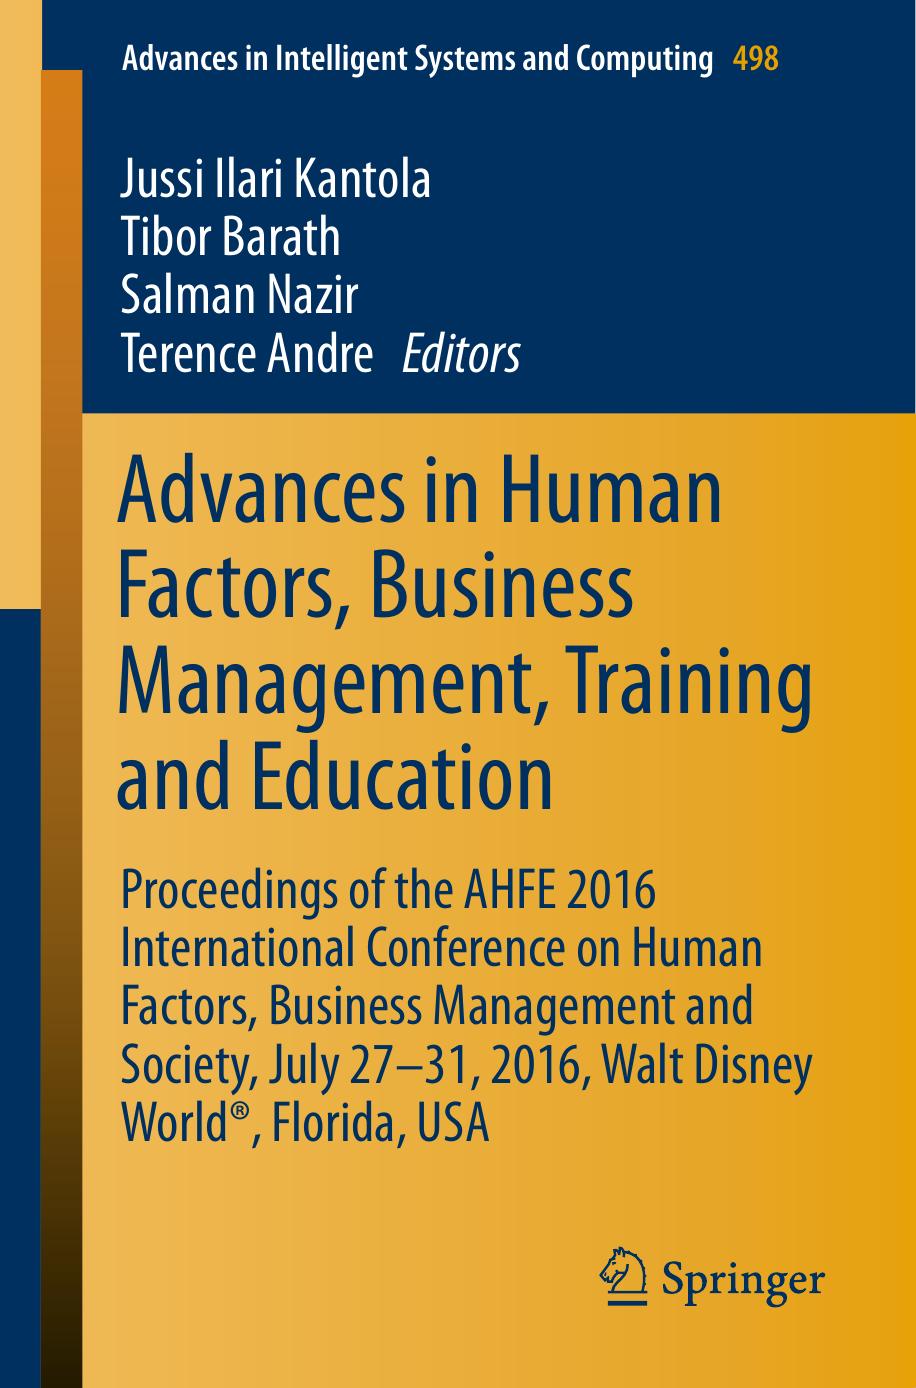 Advances in Human Factors, Business Management, Training and Education Proceedings of the AHFE 2016 International Conference  2016